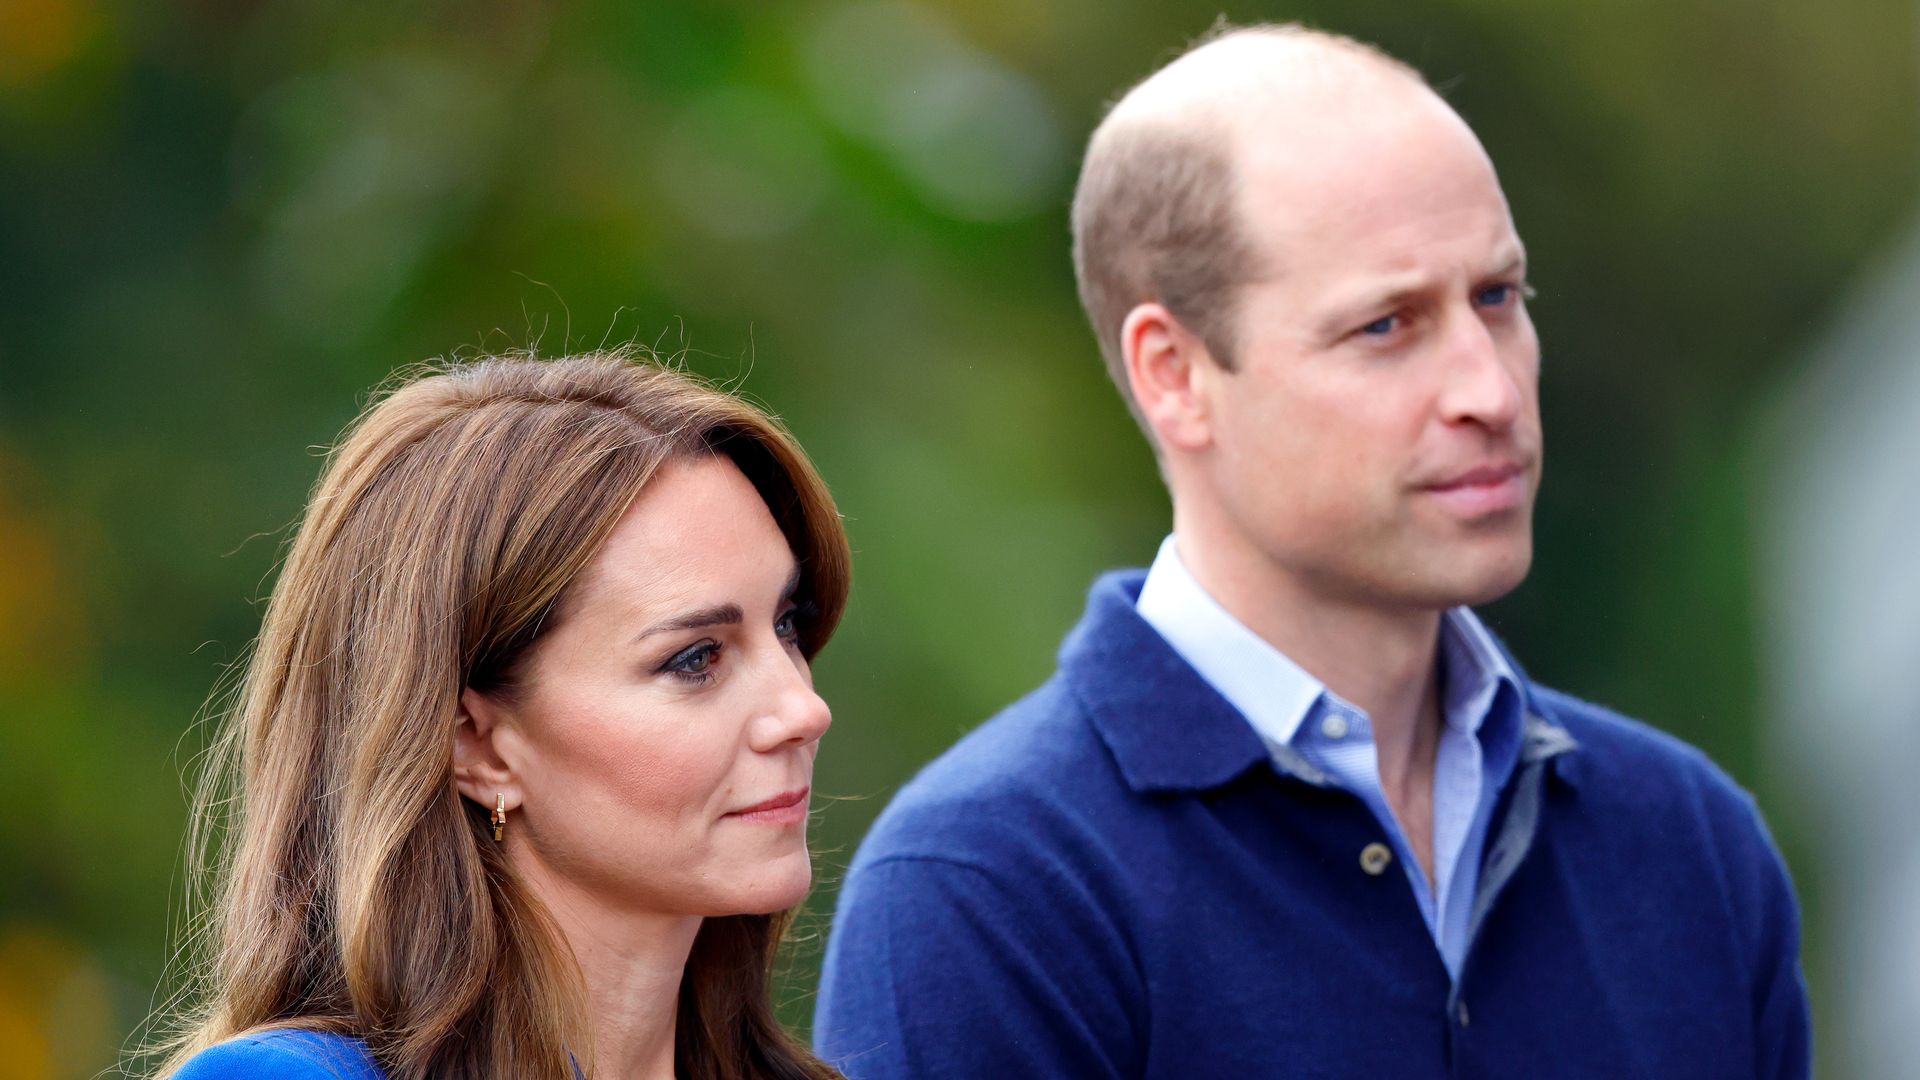 Prince William and Princess Kate's neighbours welcome surprising addition to grand home